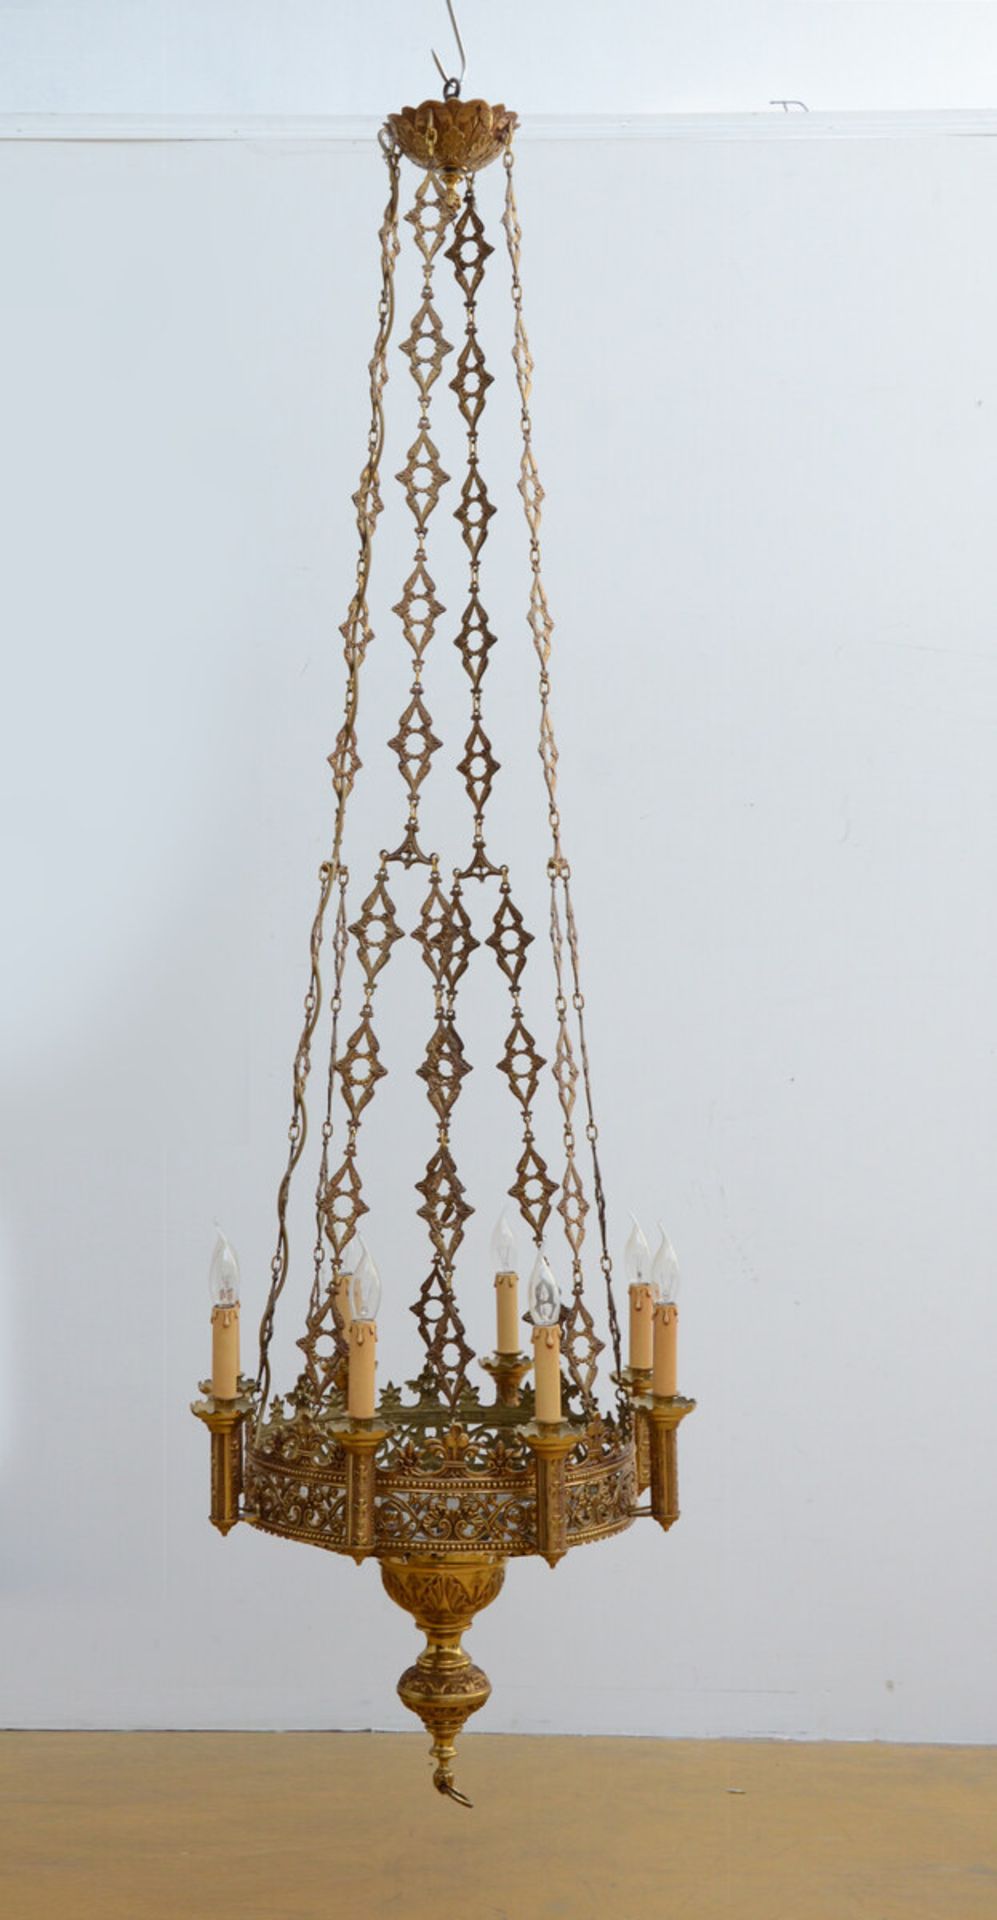 A Gothic revival chandelier in bronze with porcelain plaques (dia 60cm)